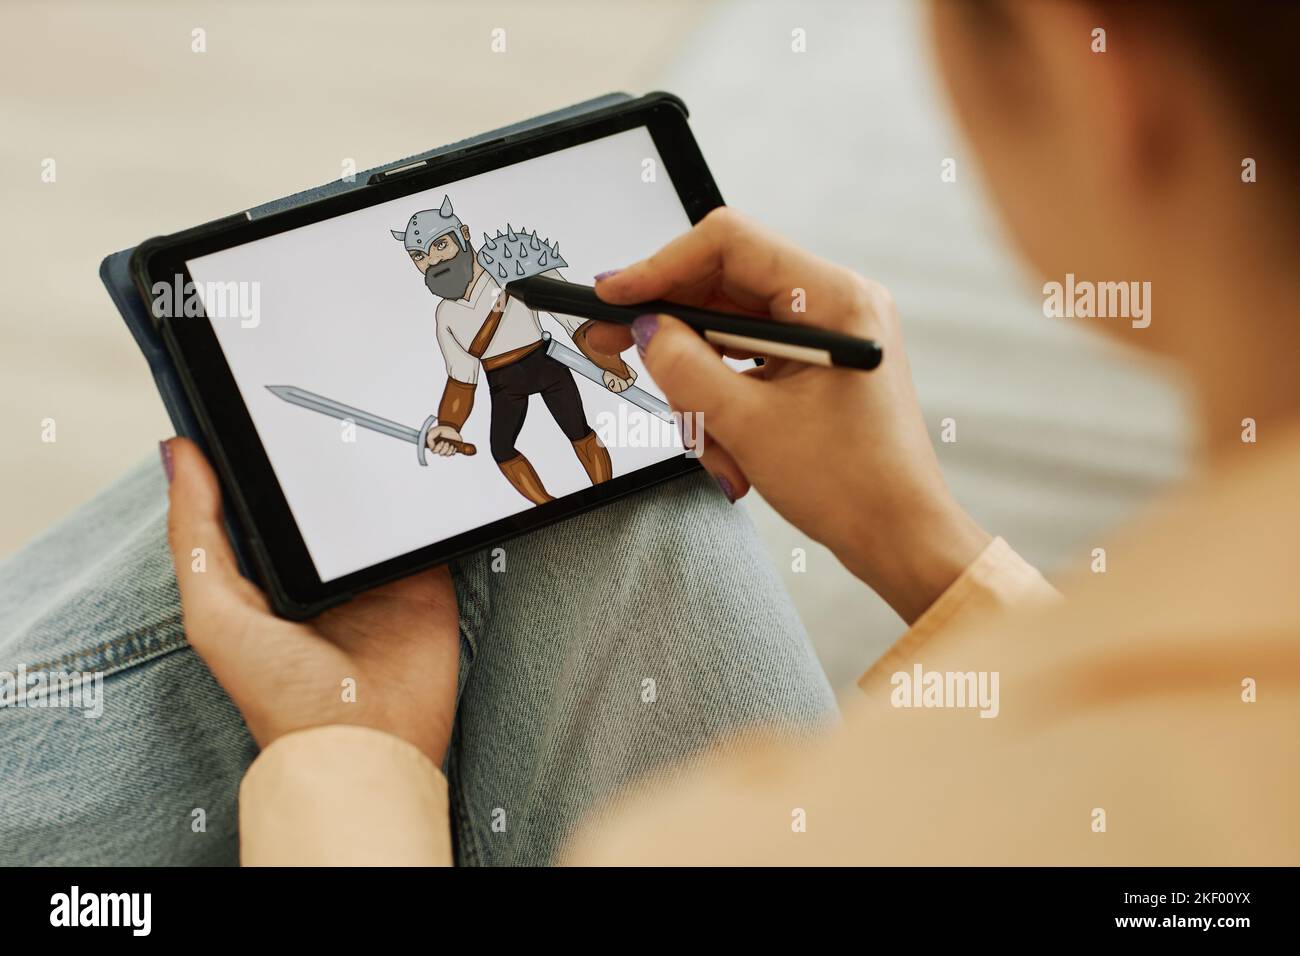 Selective focus on graphic picture of warrior on screen of tablet held by young female digital artist with stylus creating new images Stock Photo